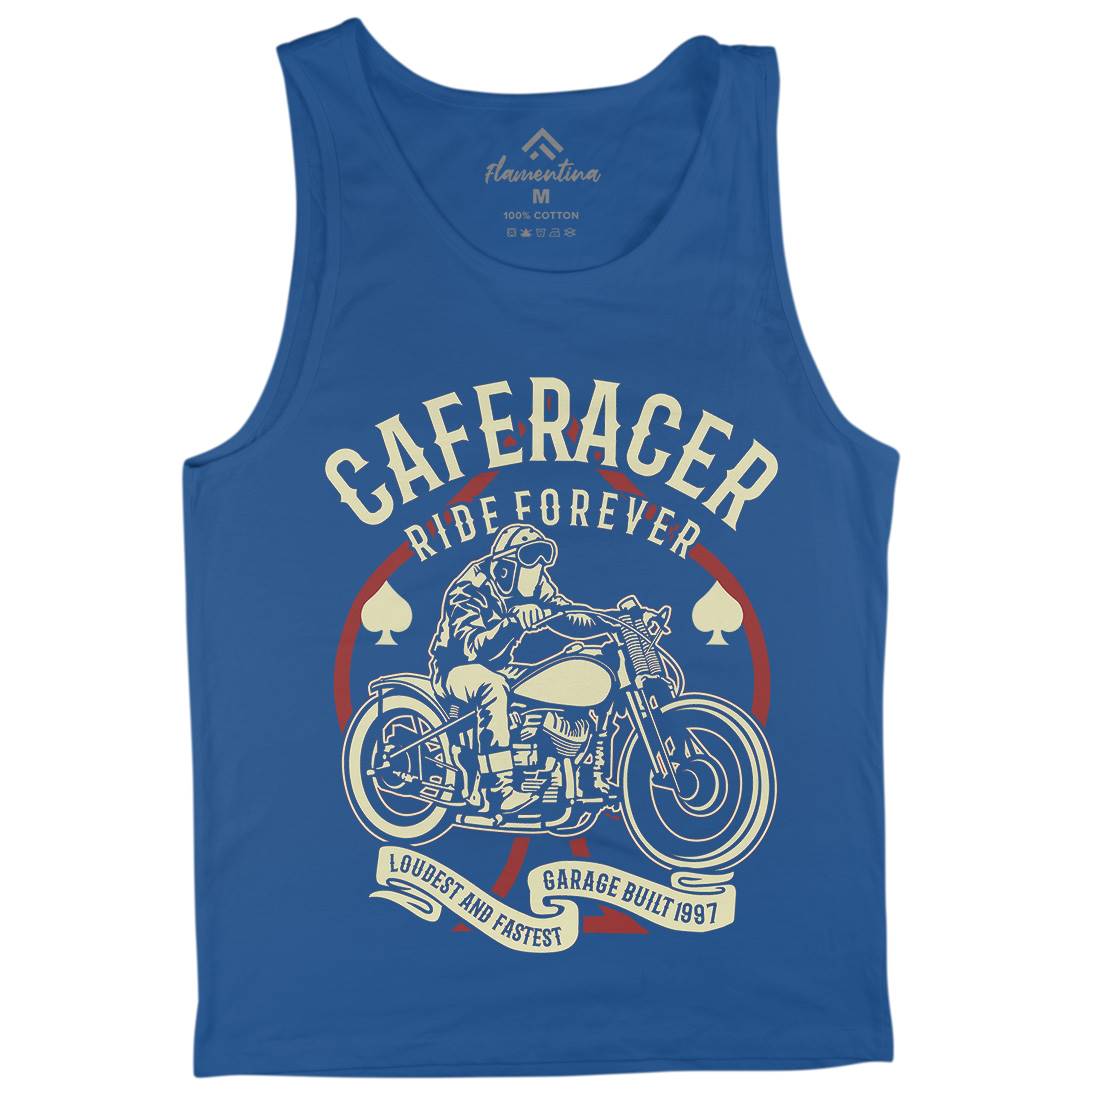 Caferacer Ride Forever Mens Tank Top Vest Motorcycles B192